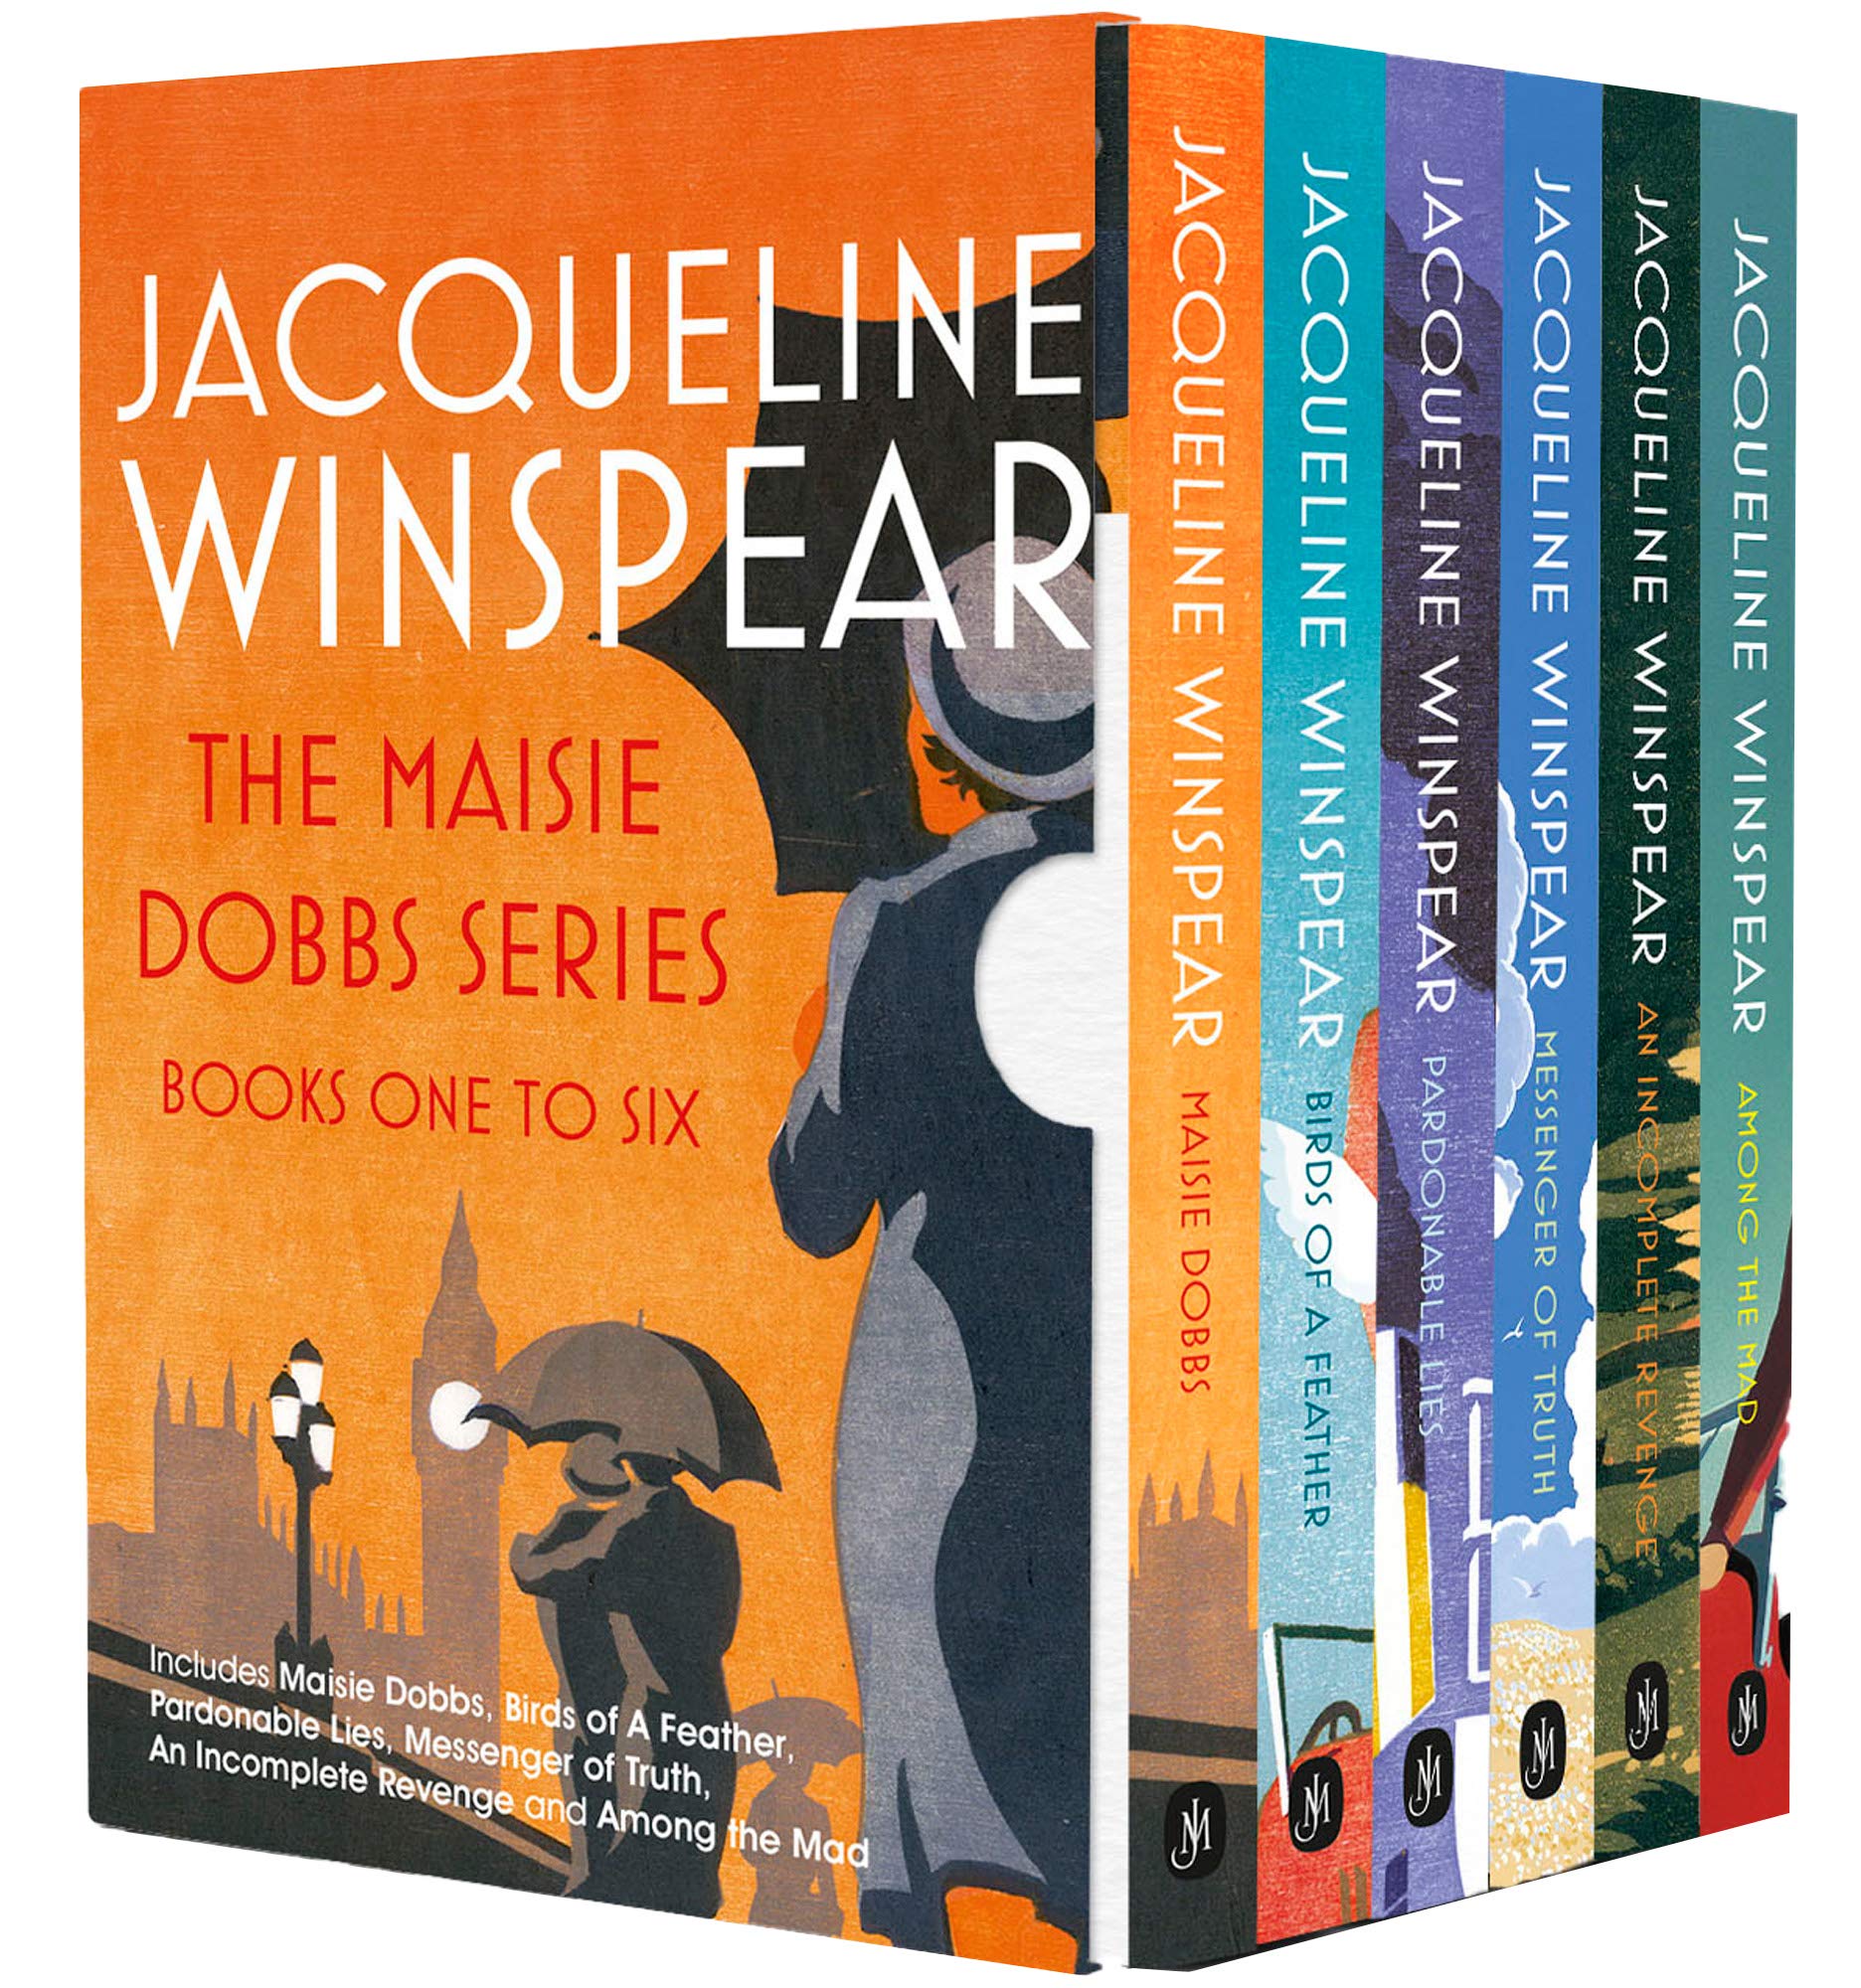 Maisie Dobbs Mystery Series Books 1 - 6 Collection Box Set by Jacqueline Winspear - Lets Buy Books